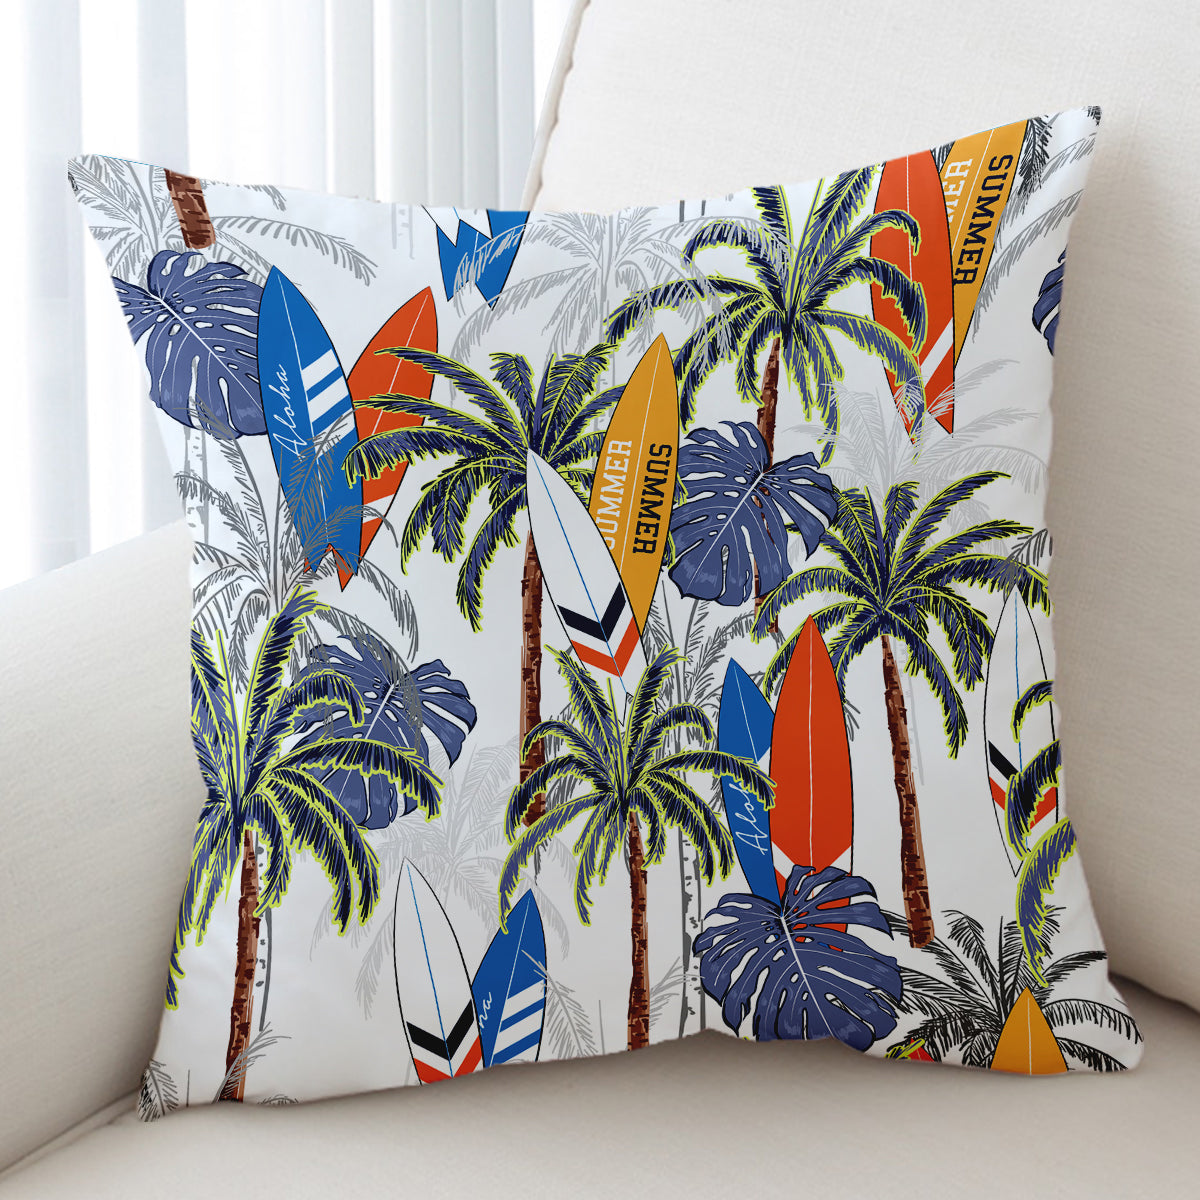 Tropical Surfer Pillow Cover